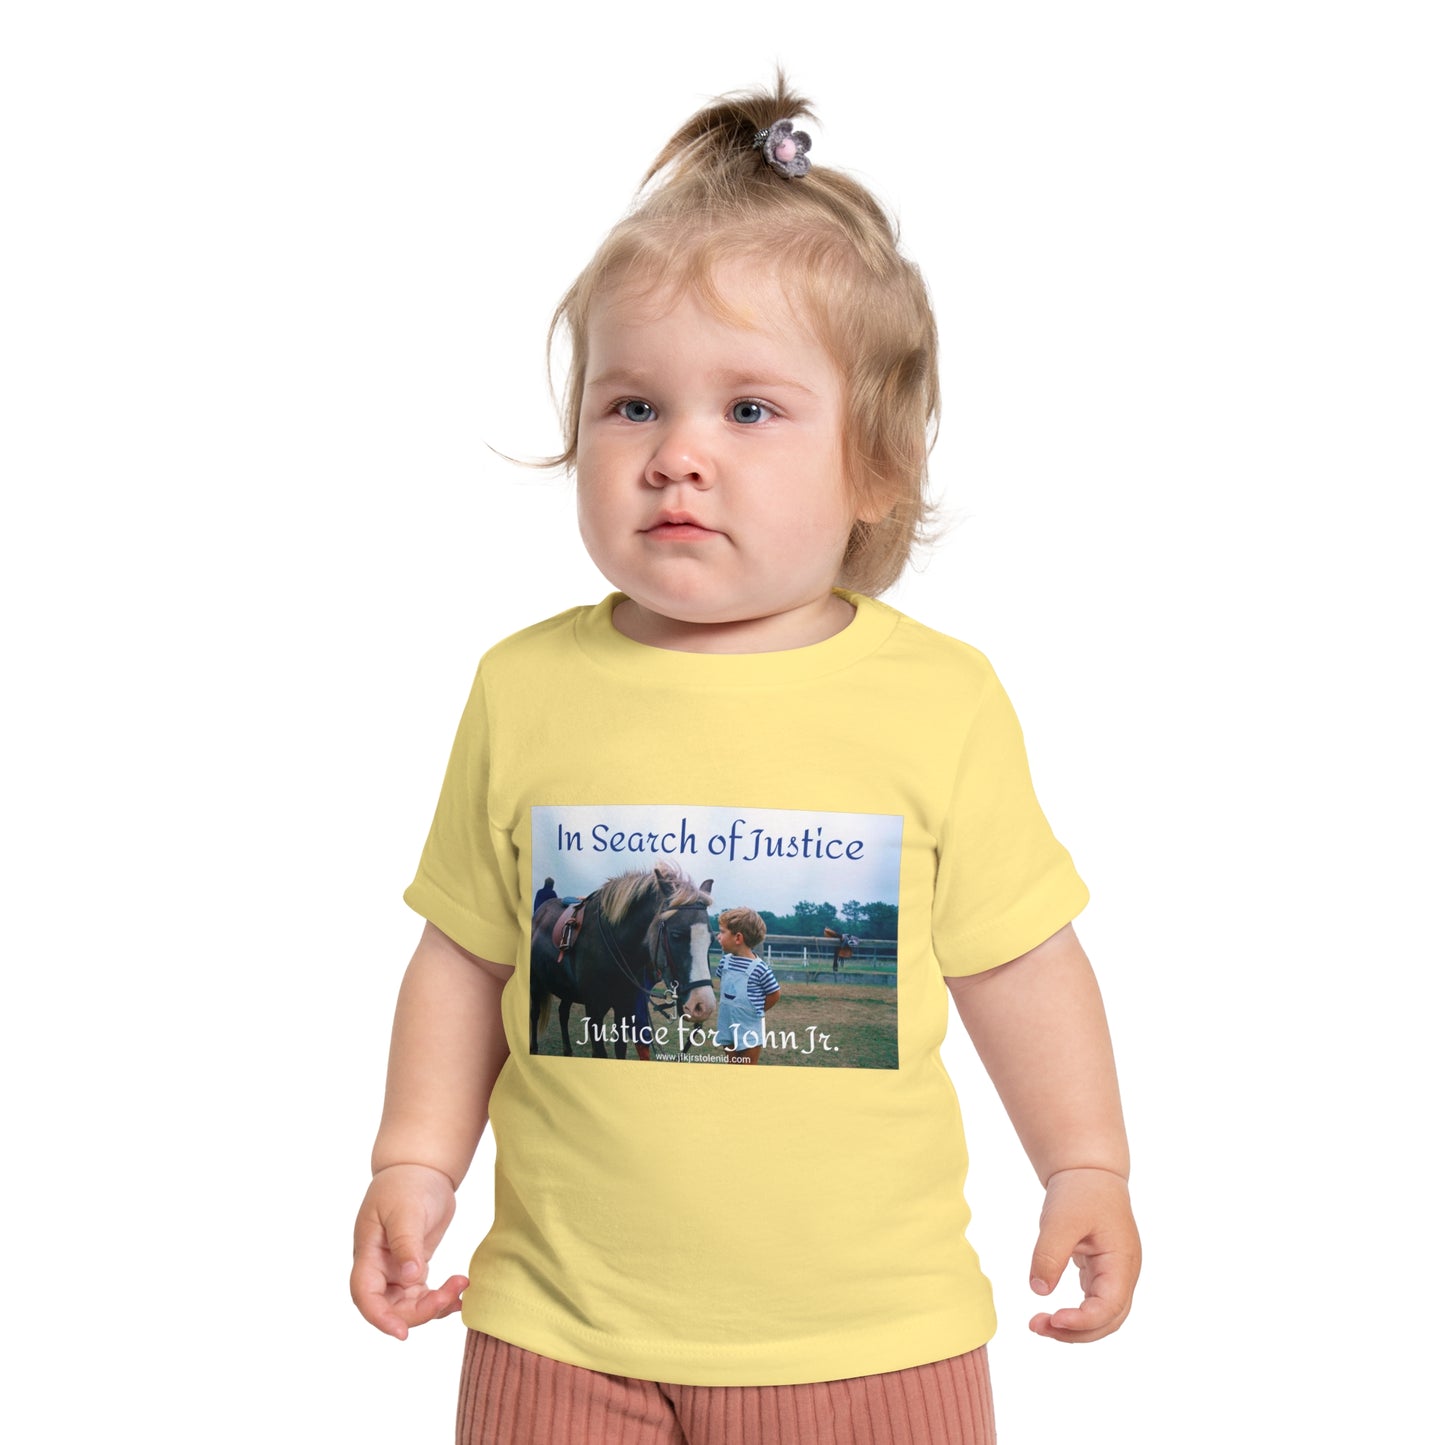 In Search of Justice for John Jr. Baby Short Sleeve T-Shirt